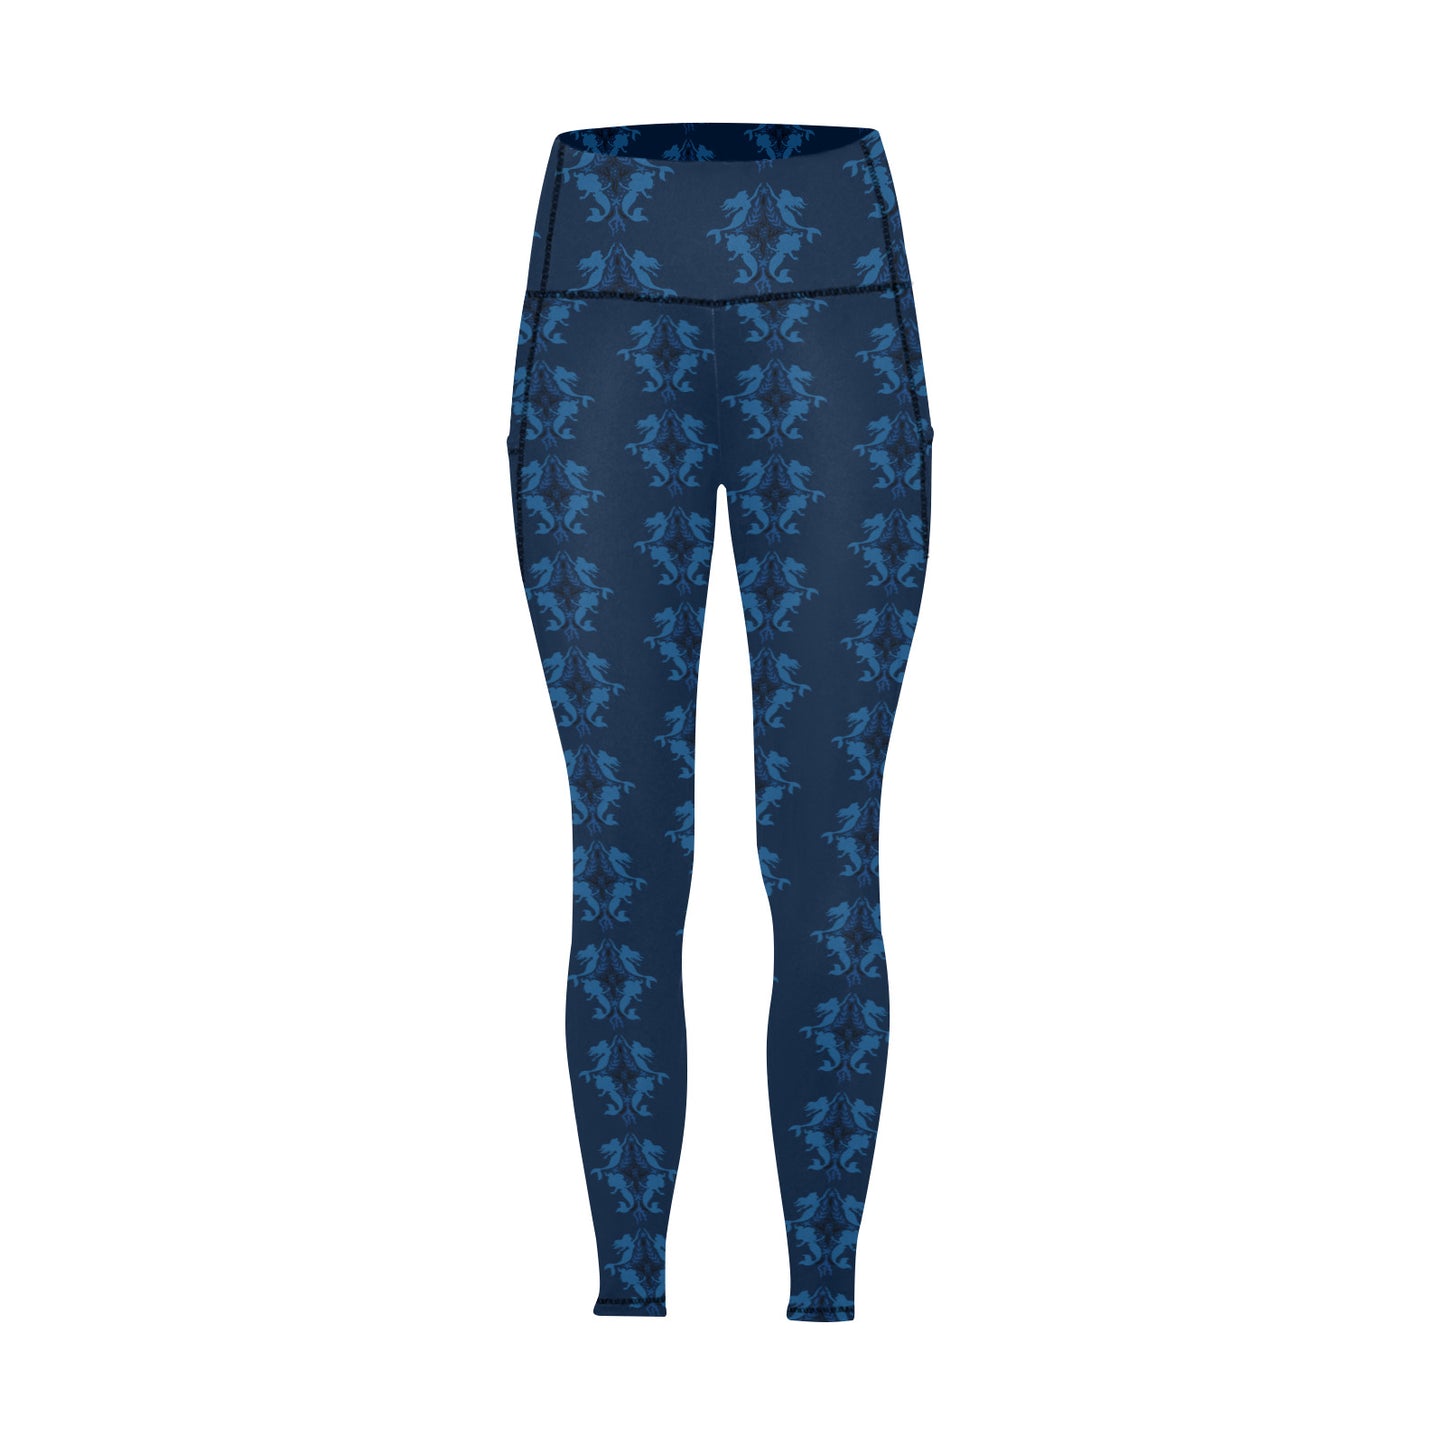 Under The Sea Women's Athletic Leggings With Pockets